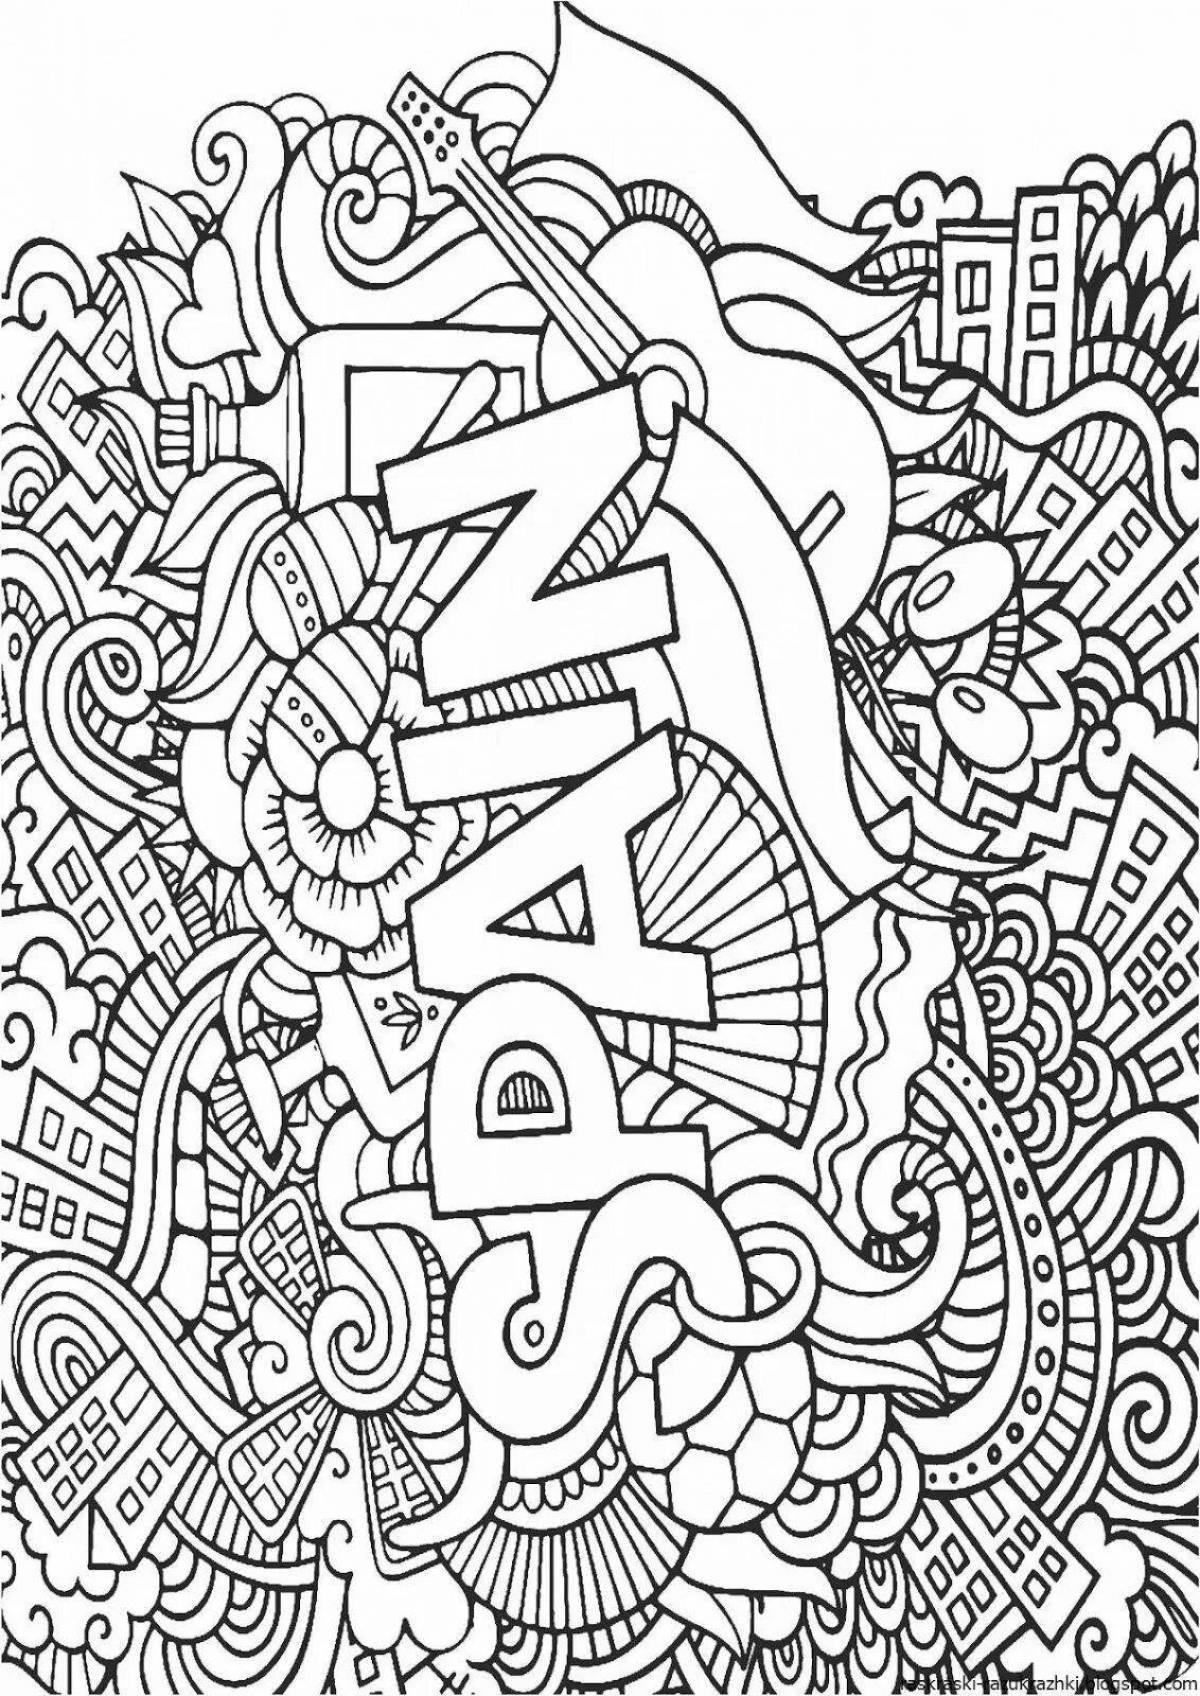 Adorable coloring book cool for adults